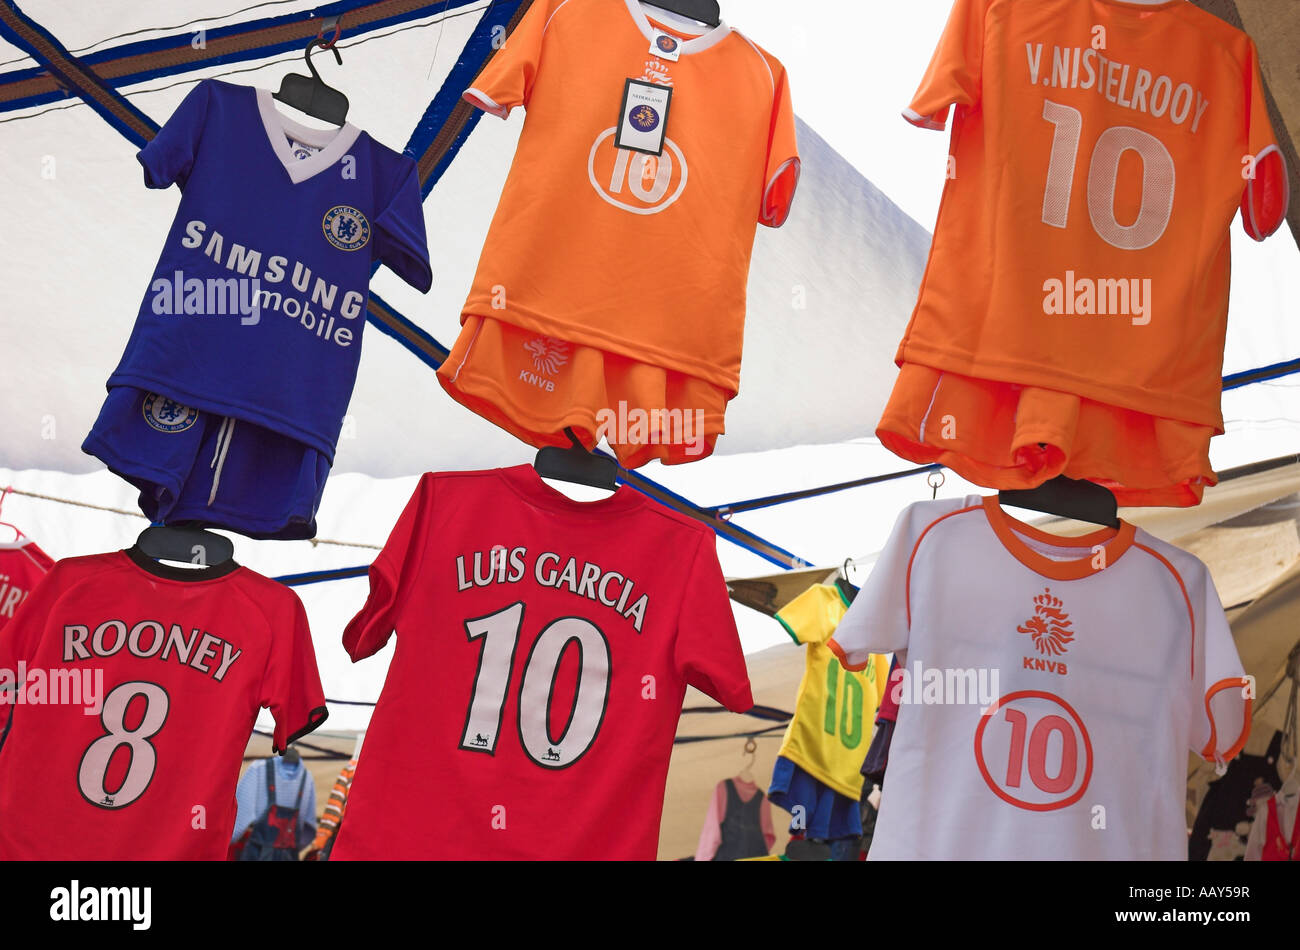 Fake Football Kit High Resolution Stock Photography and Images - Alamy